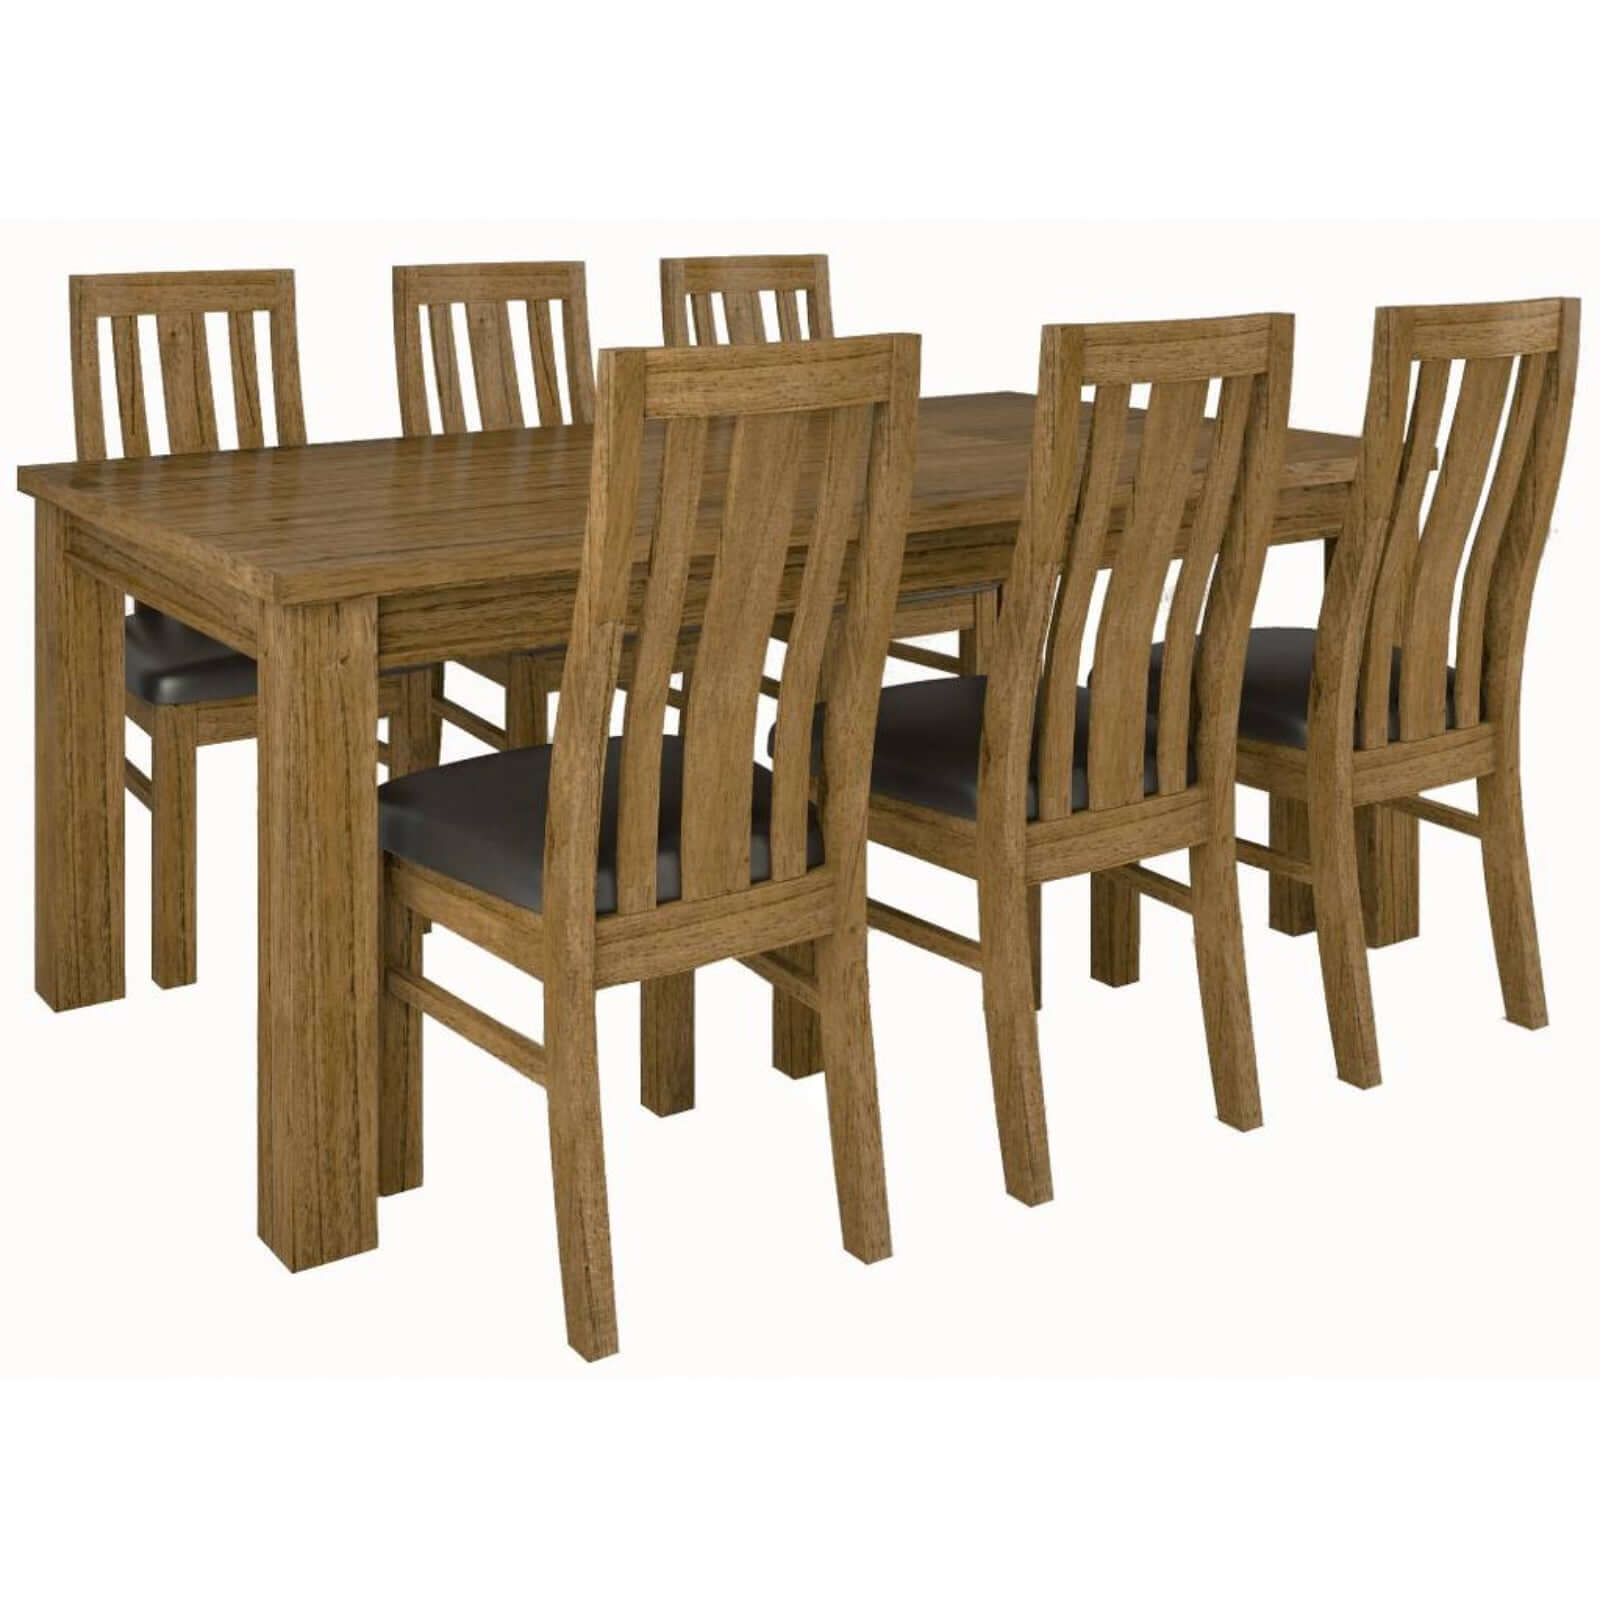 Birdsville 7pc Dining Set 190cm Table 6 PU Seat Chair Solid Mt Ash Wood - Brown-Upinteriors